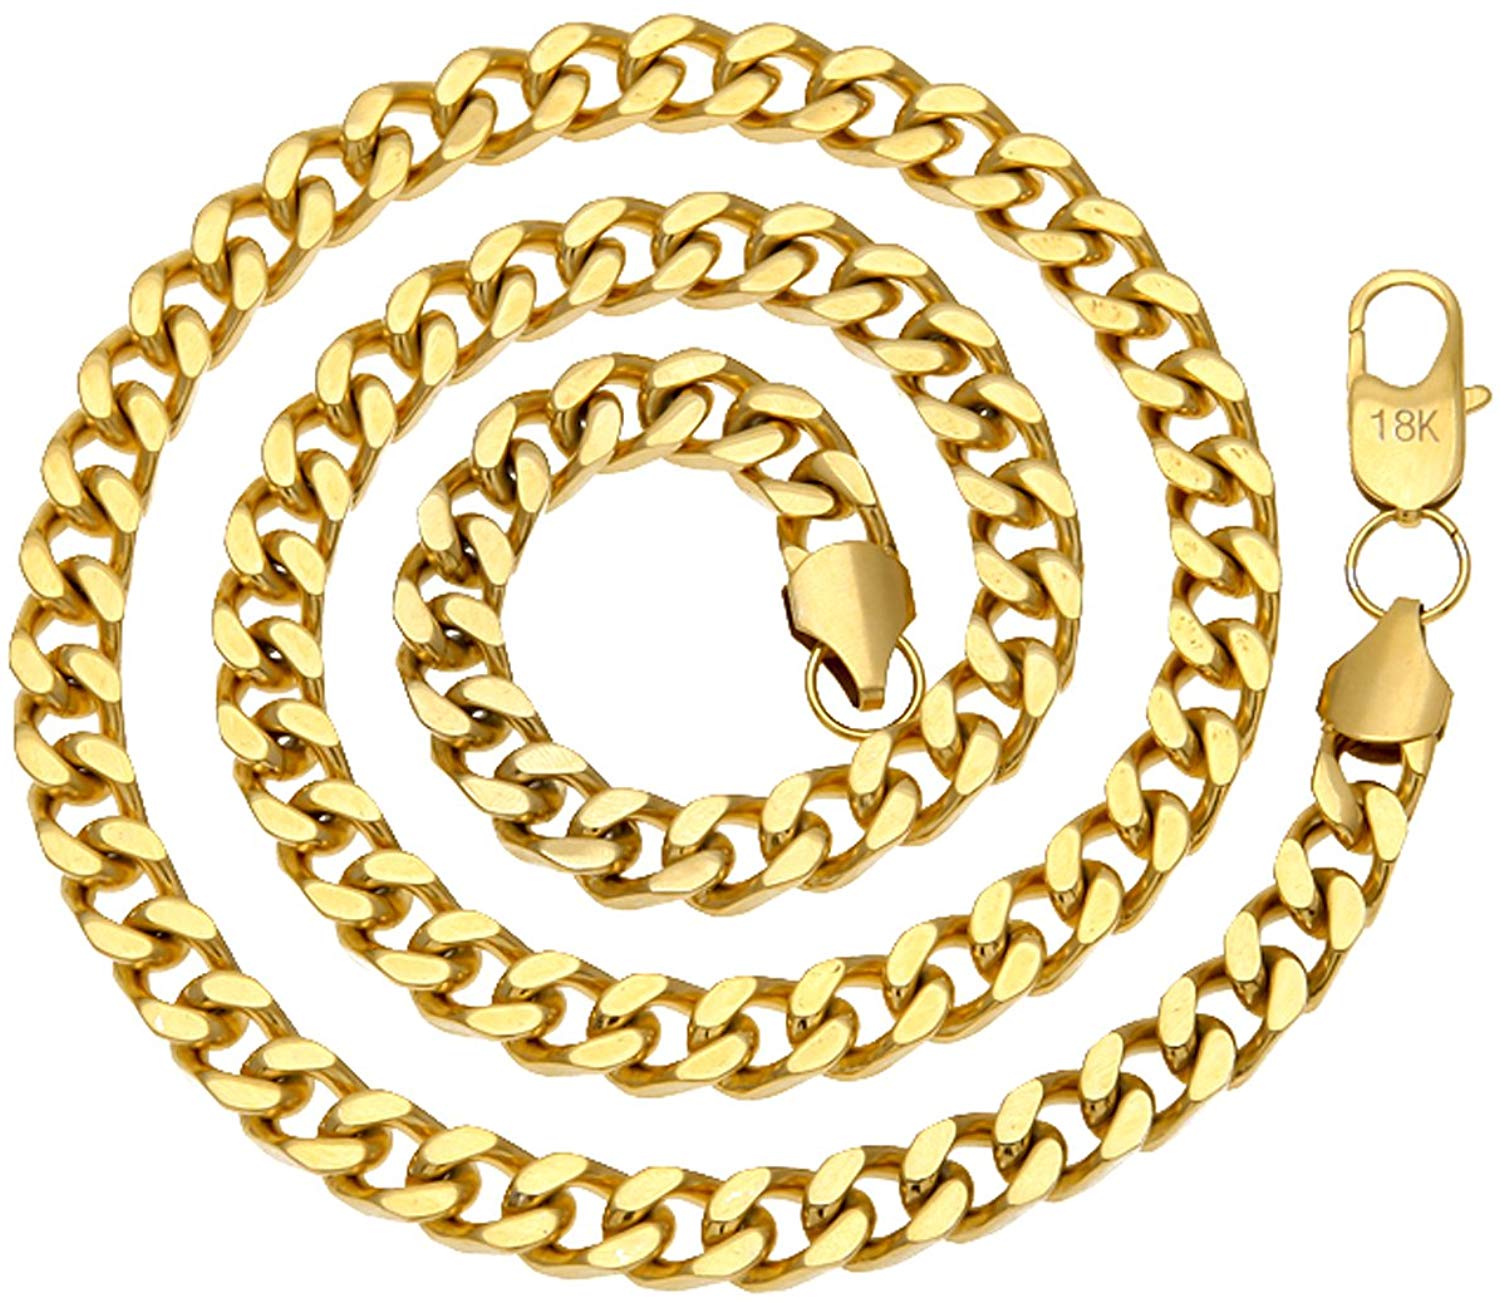 Hollywood Jewelry Necklace Chain [ 5mm Cuban Link Chain ] up to 20X More  18k Plating Than Other Gold Chains.